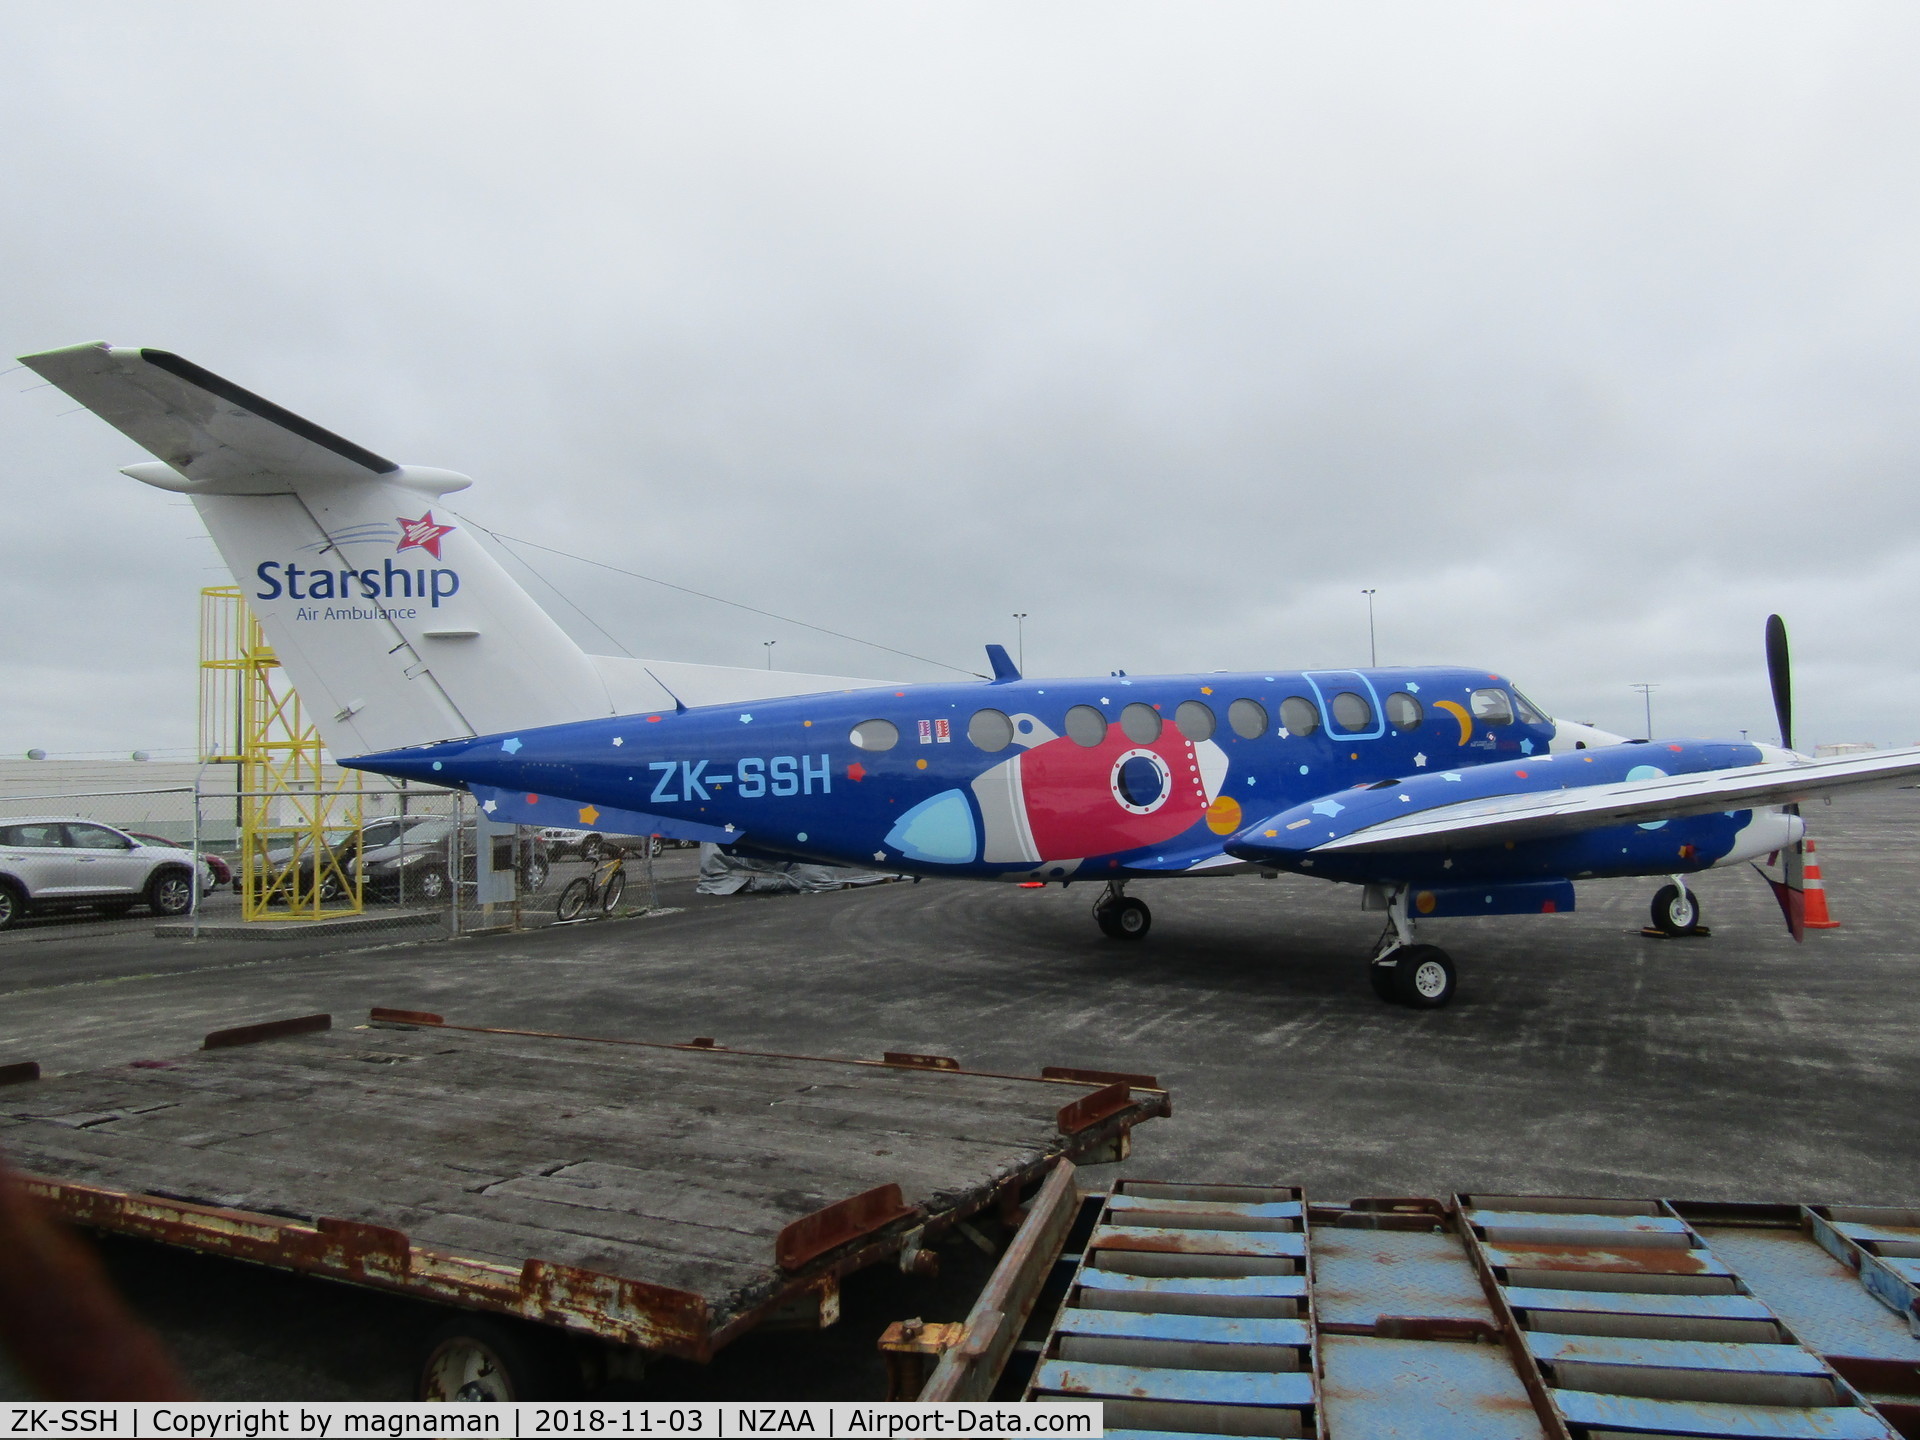 ZK-SSH, 2007 Beechcraft King Air 300 C/N FL-525, hope not used very much (starship is children's hospital in Auckland)